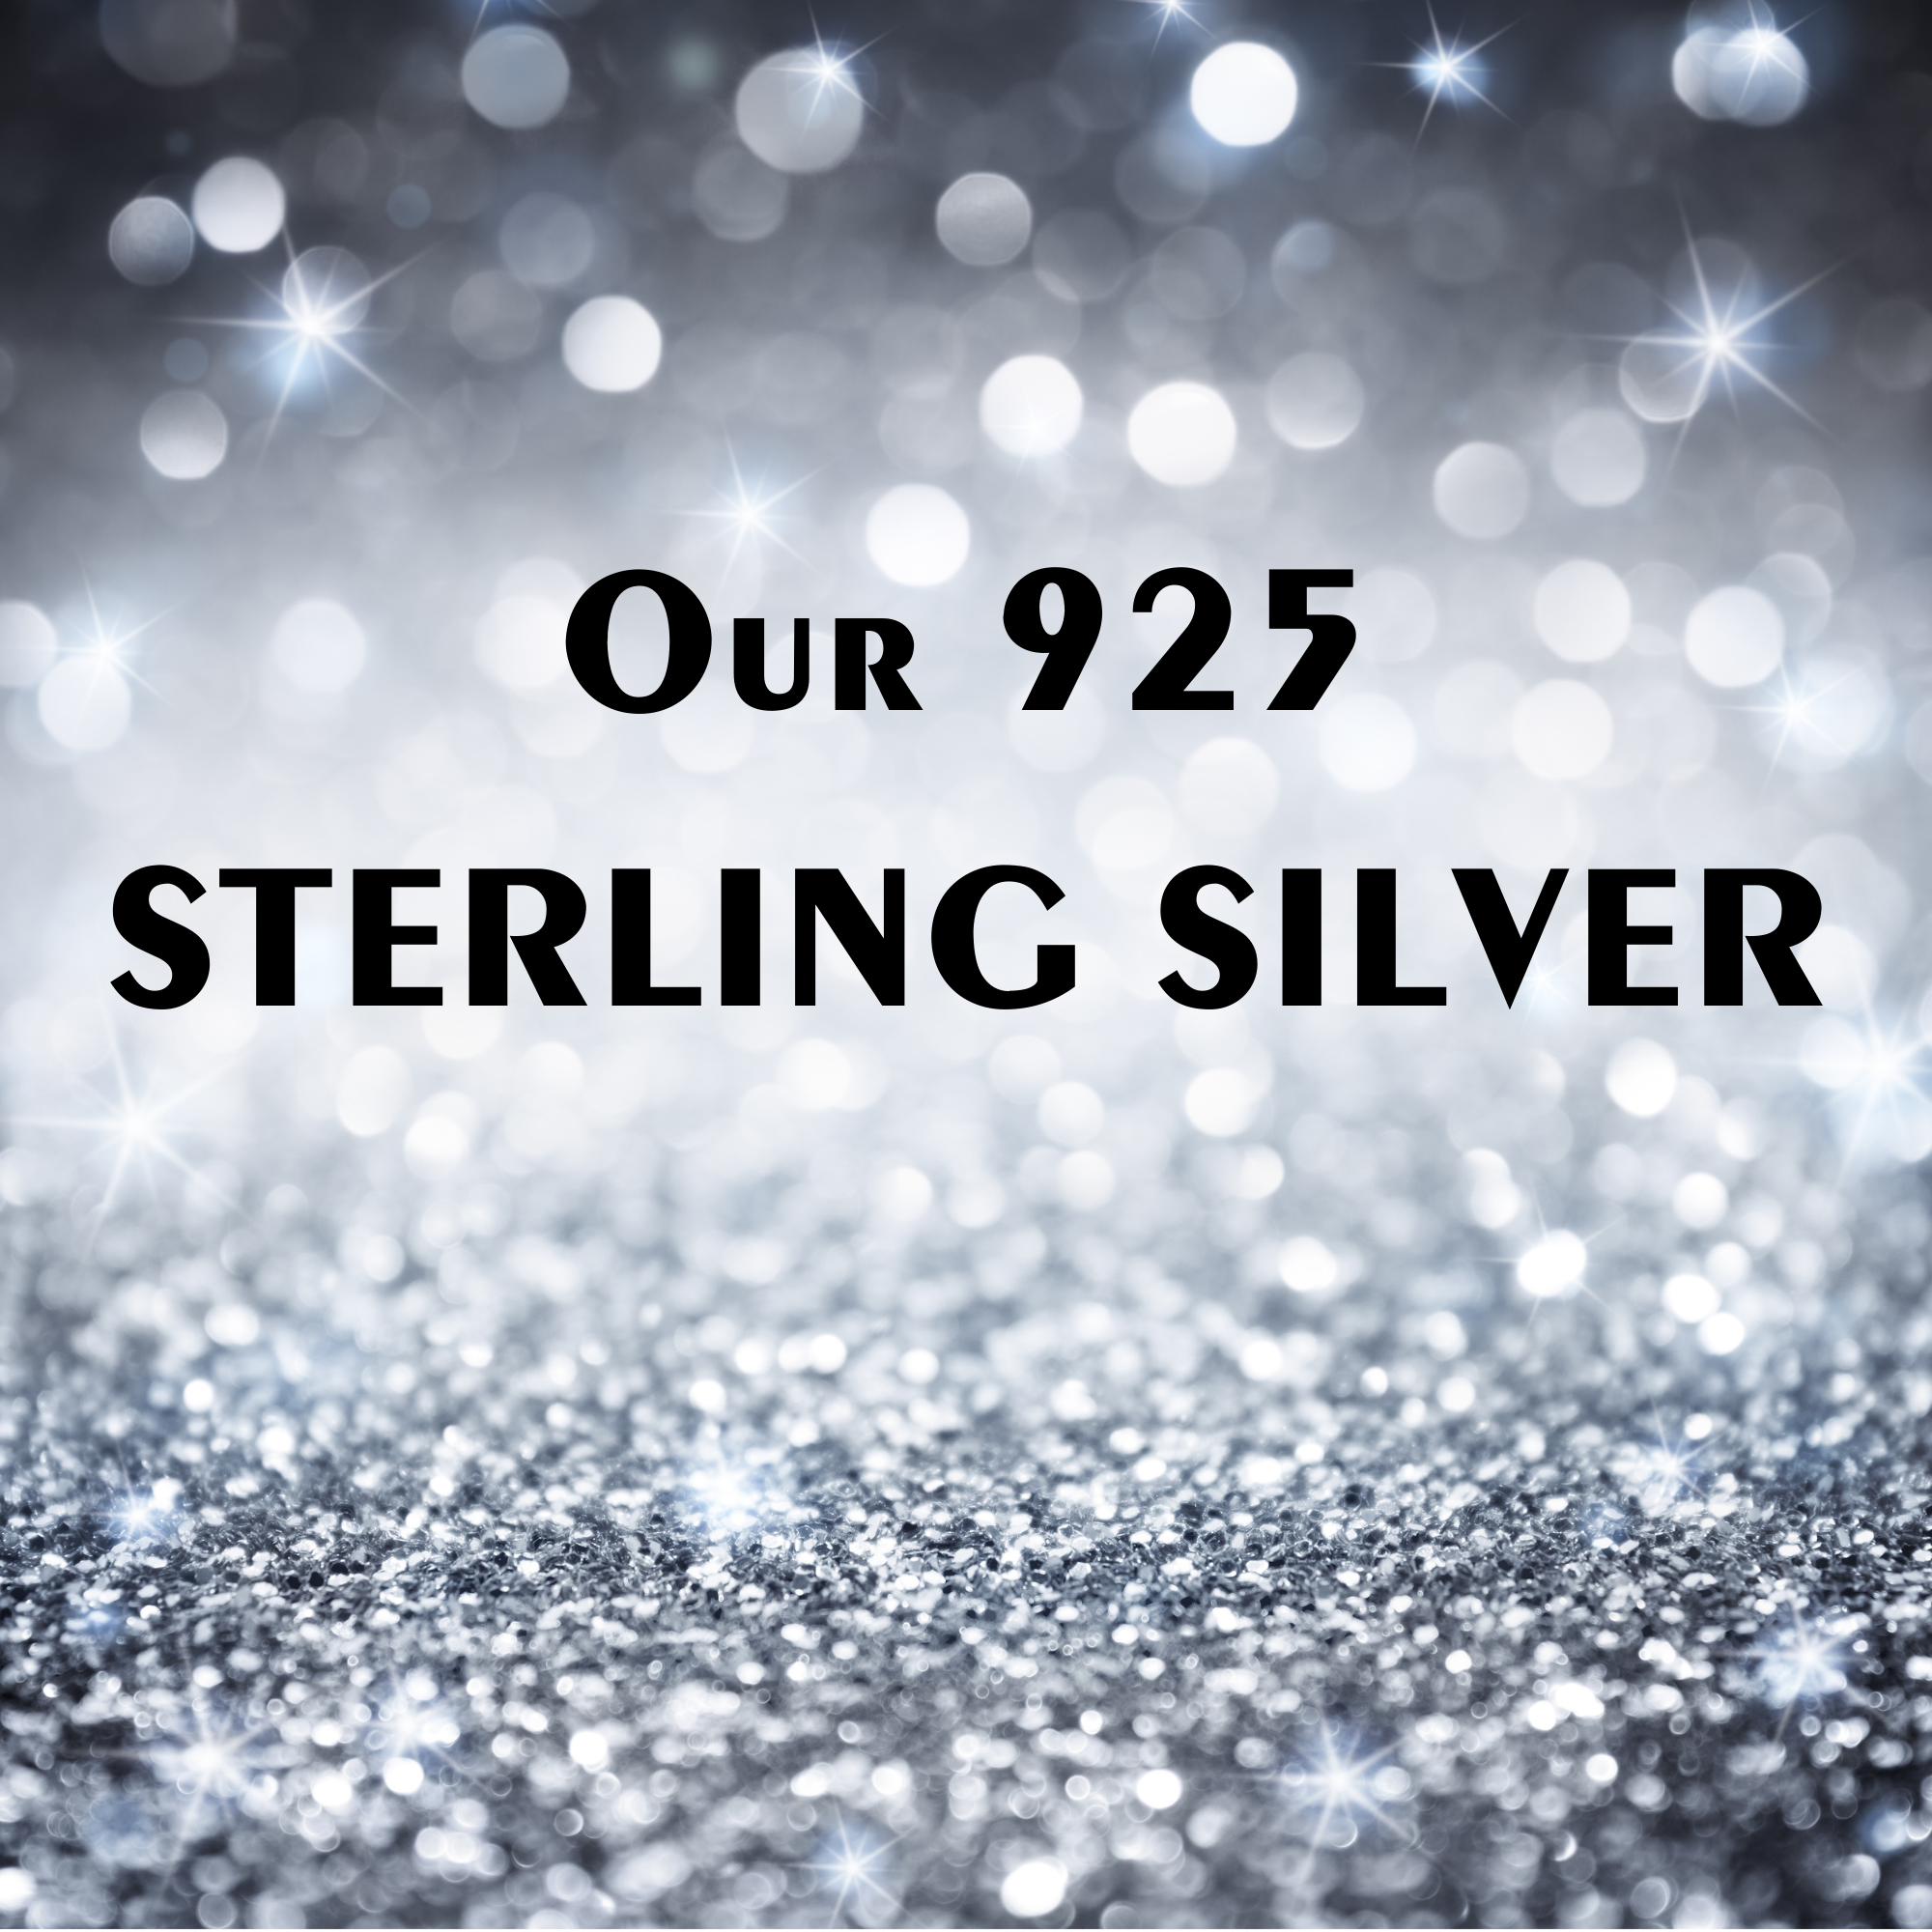 Our Sterling Silver